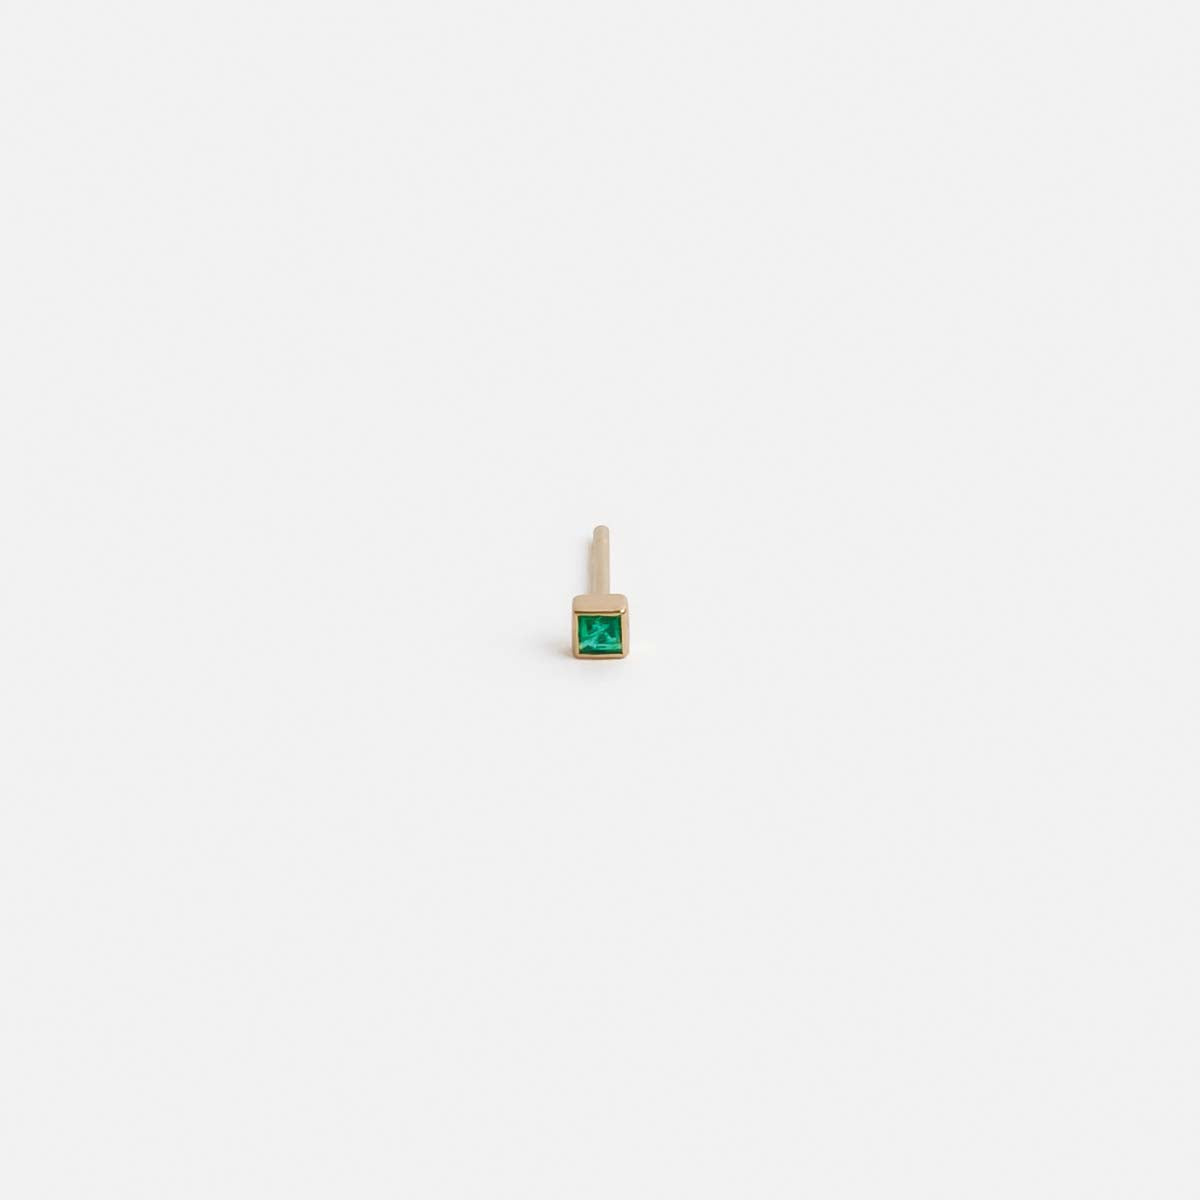 Small Plain Ona Bar Stud in 14k Gold set with Emerald By SHW Fine Jewelry New York City